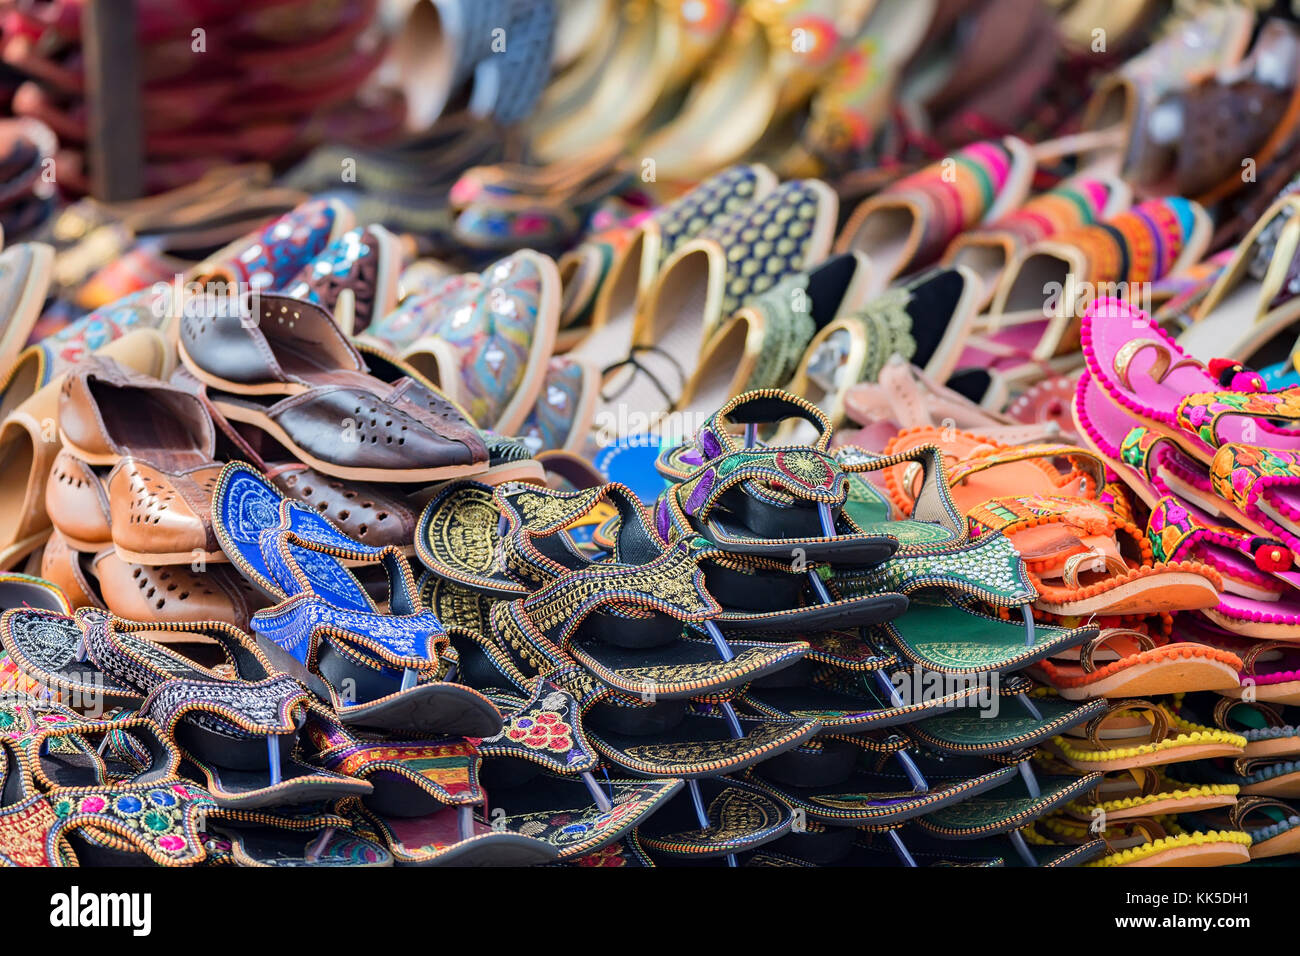 Colorful ethnic shoes at marketplace in India Stock Photo